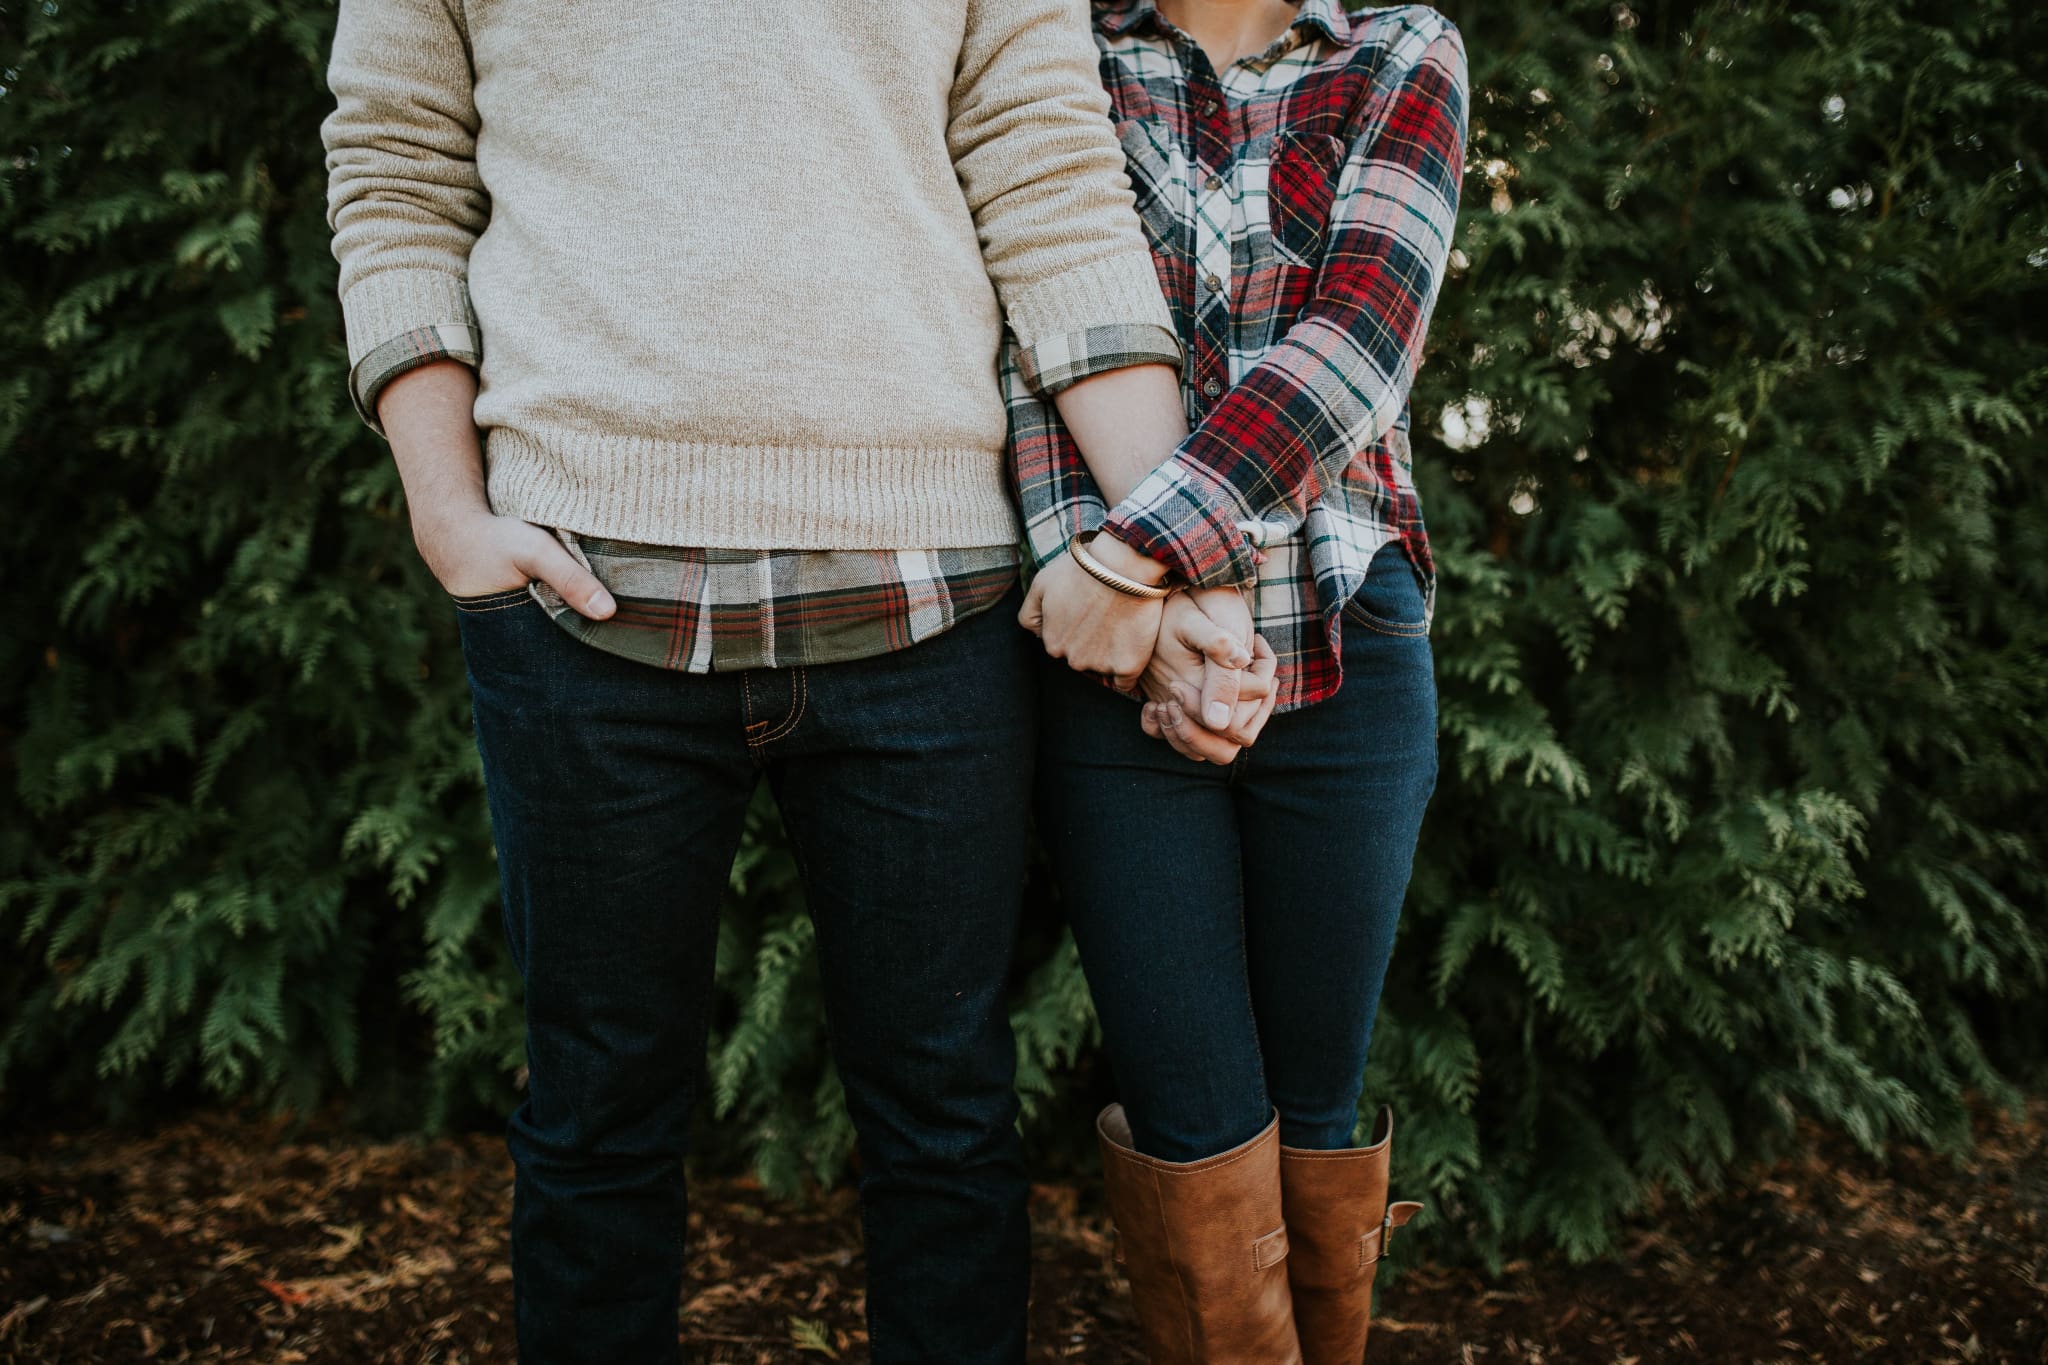 Comon law Couple holding hands. Photo by Brooke Cagle on Unsplash